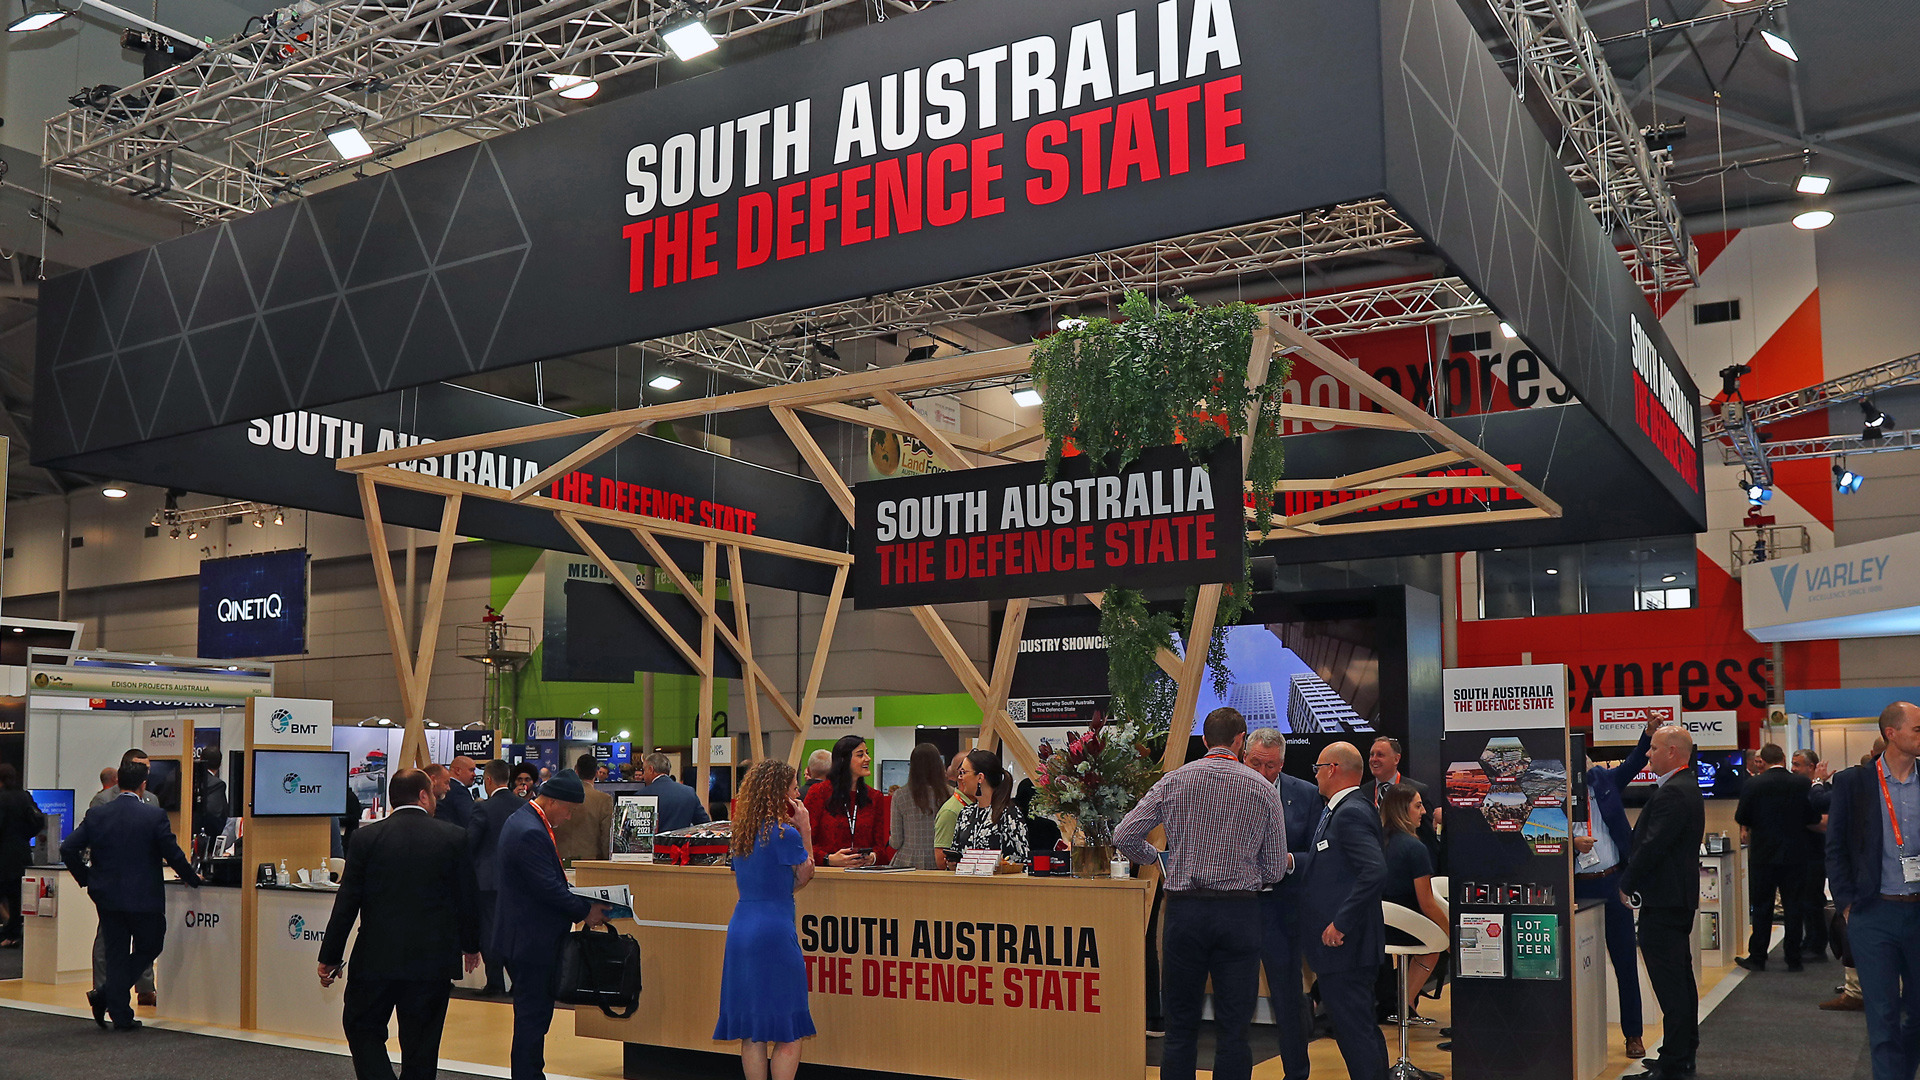 The Defence State stand